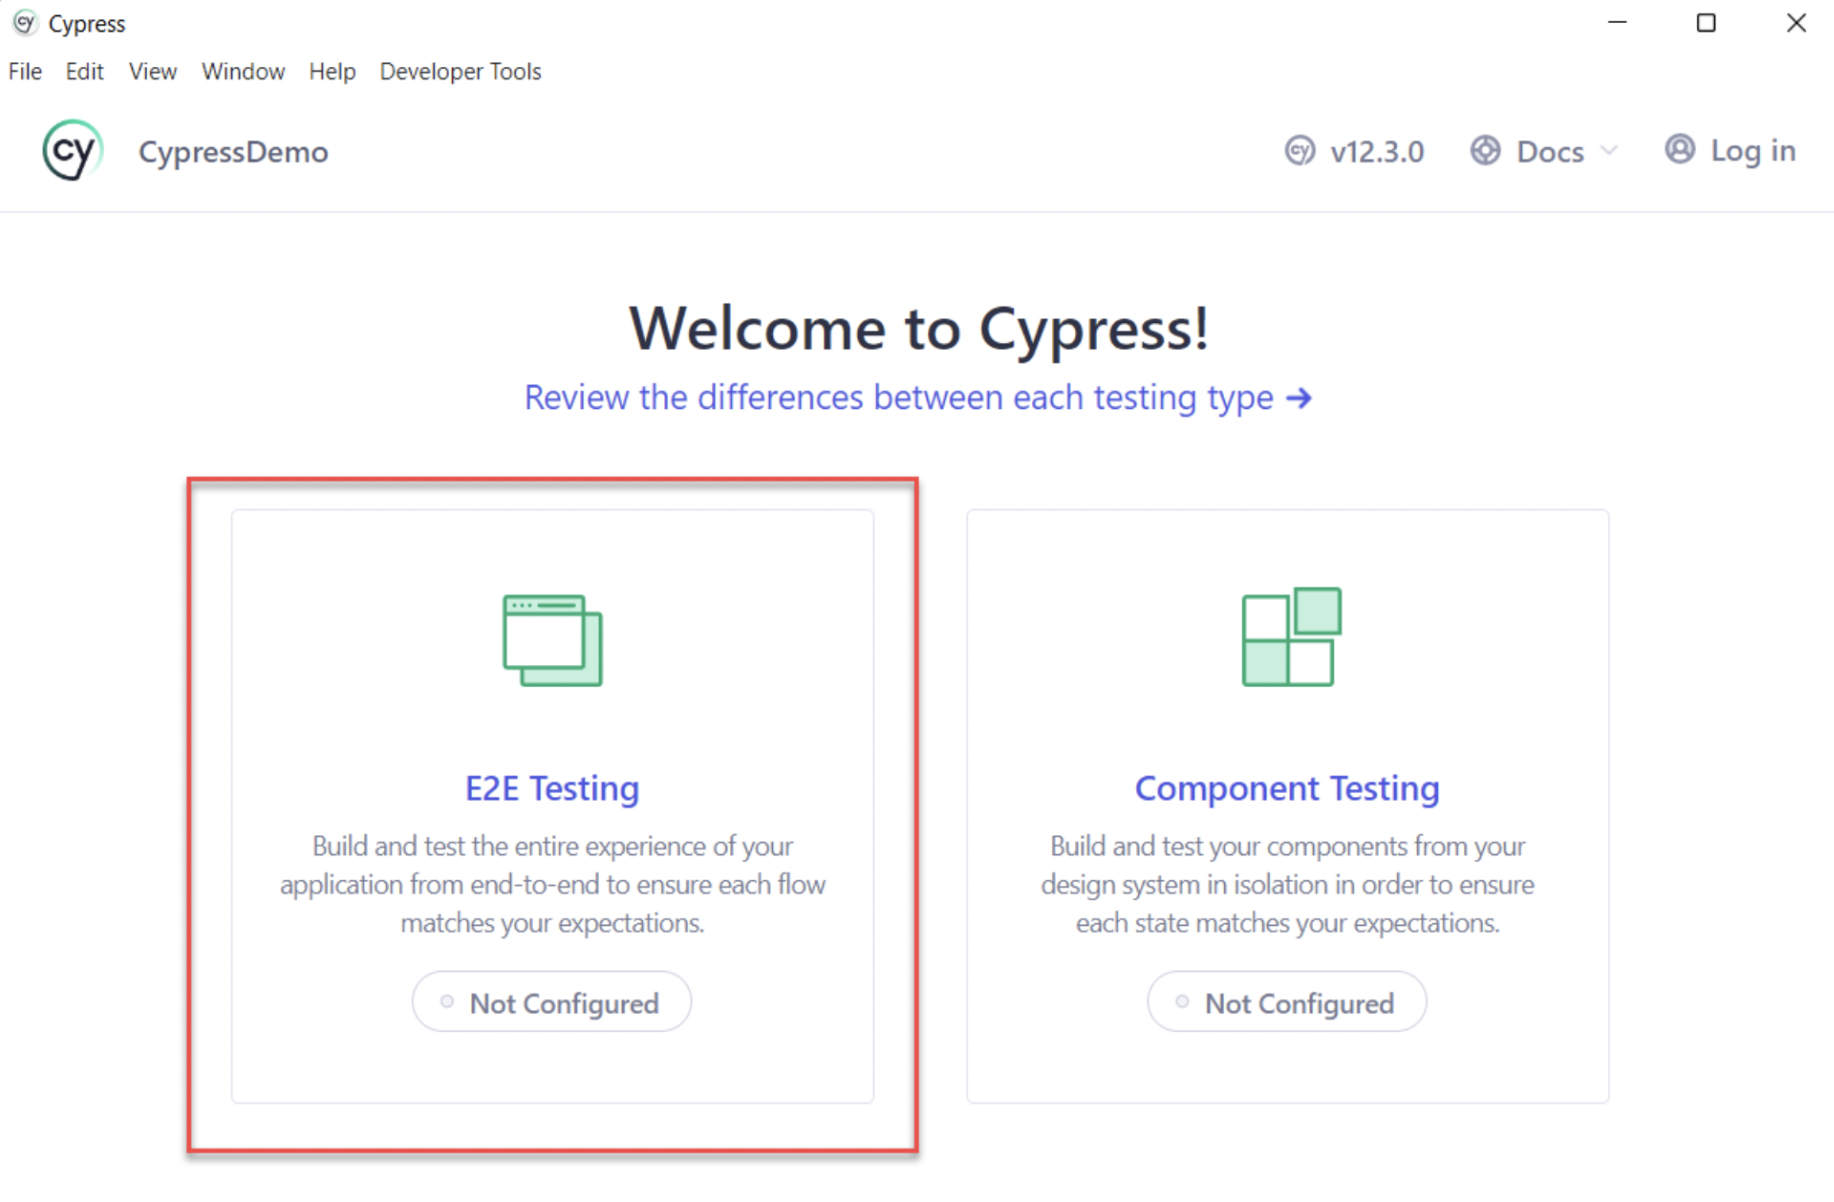 Choose Test Type to test React App in Cypress